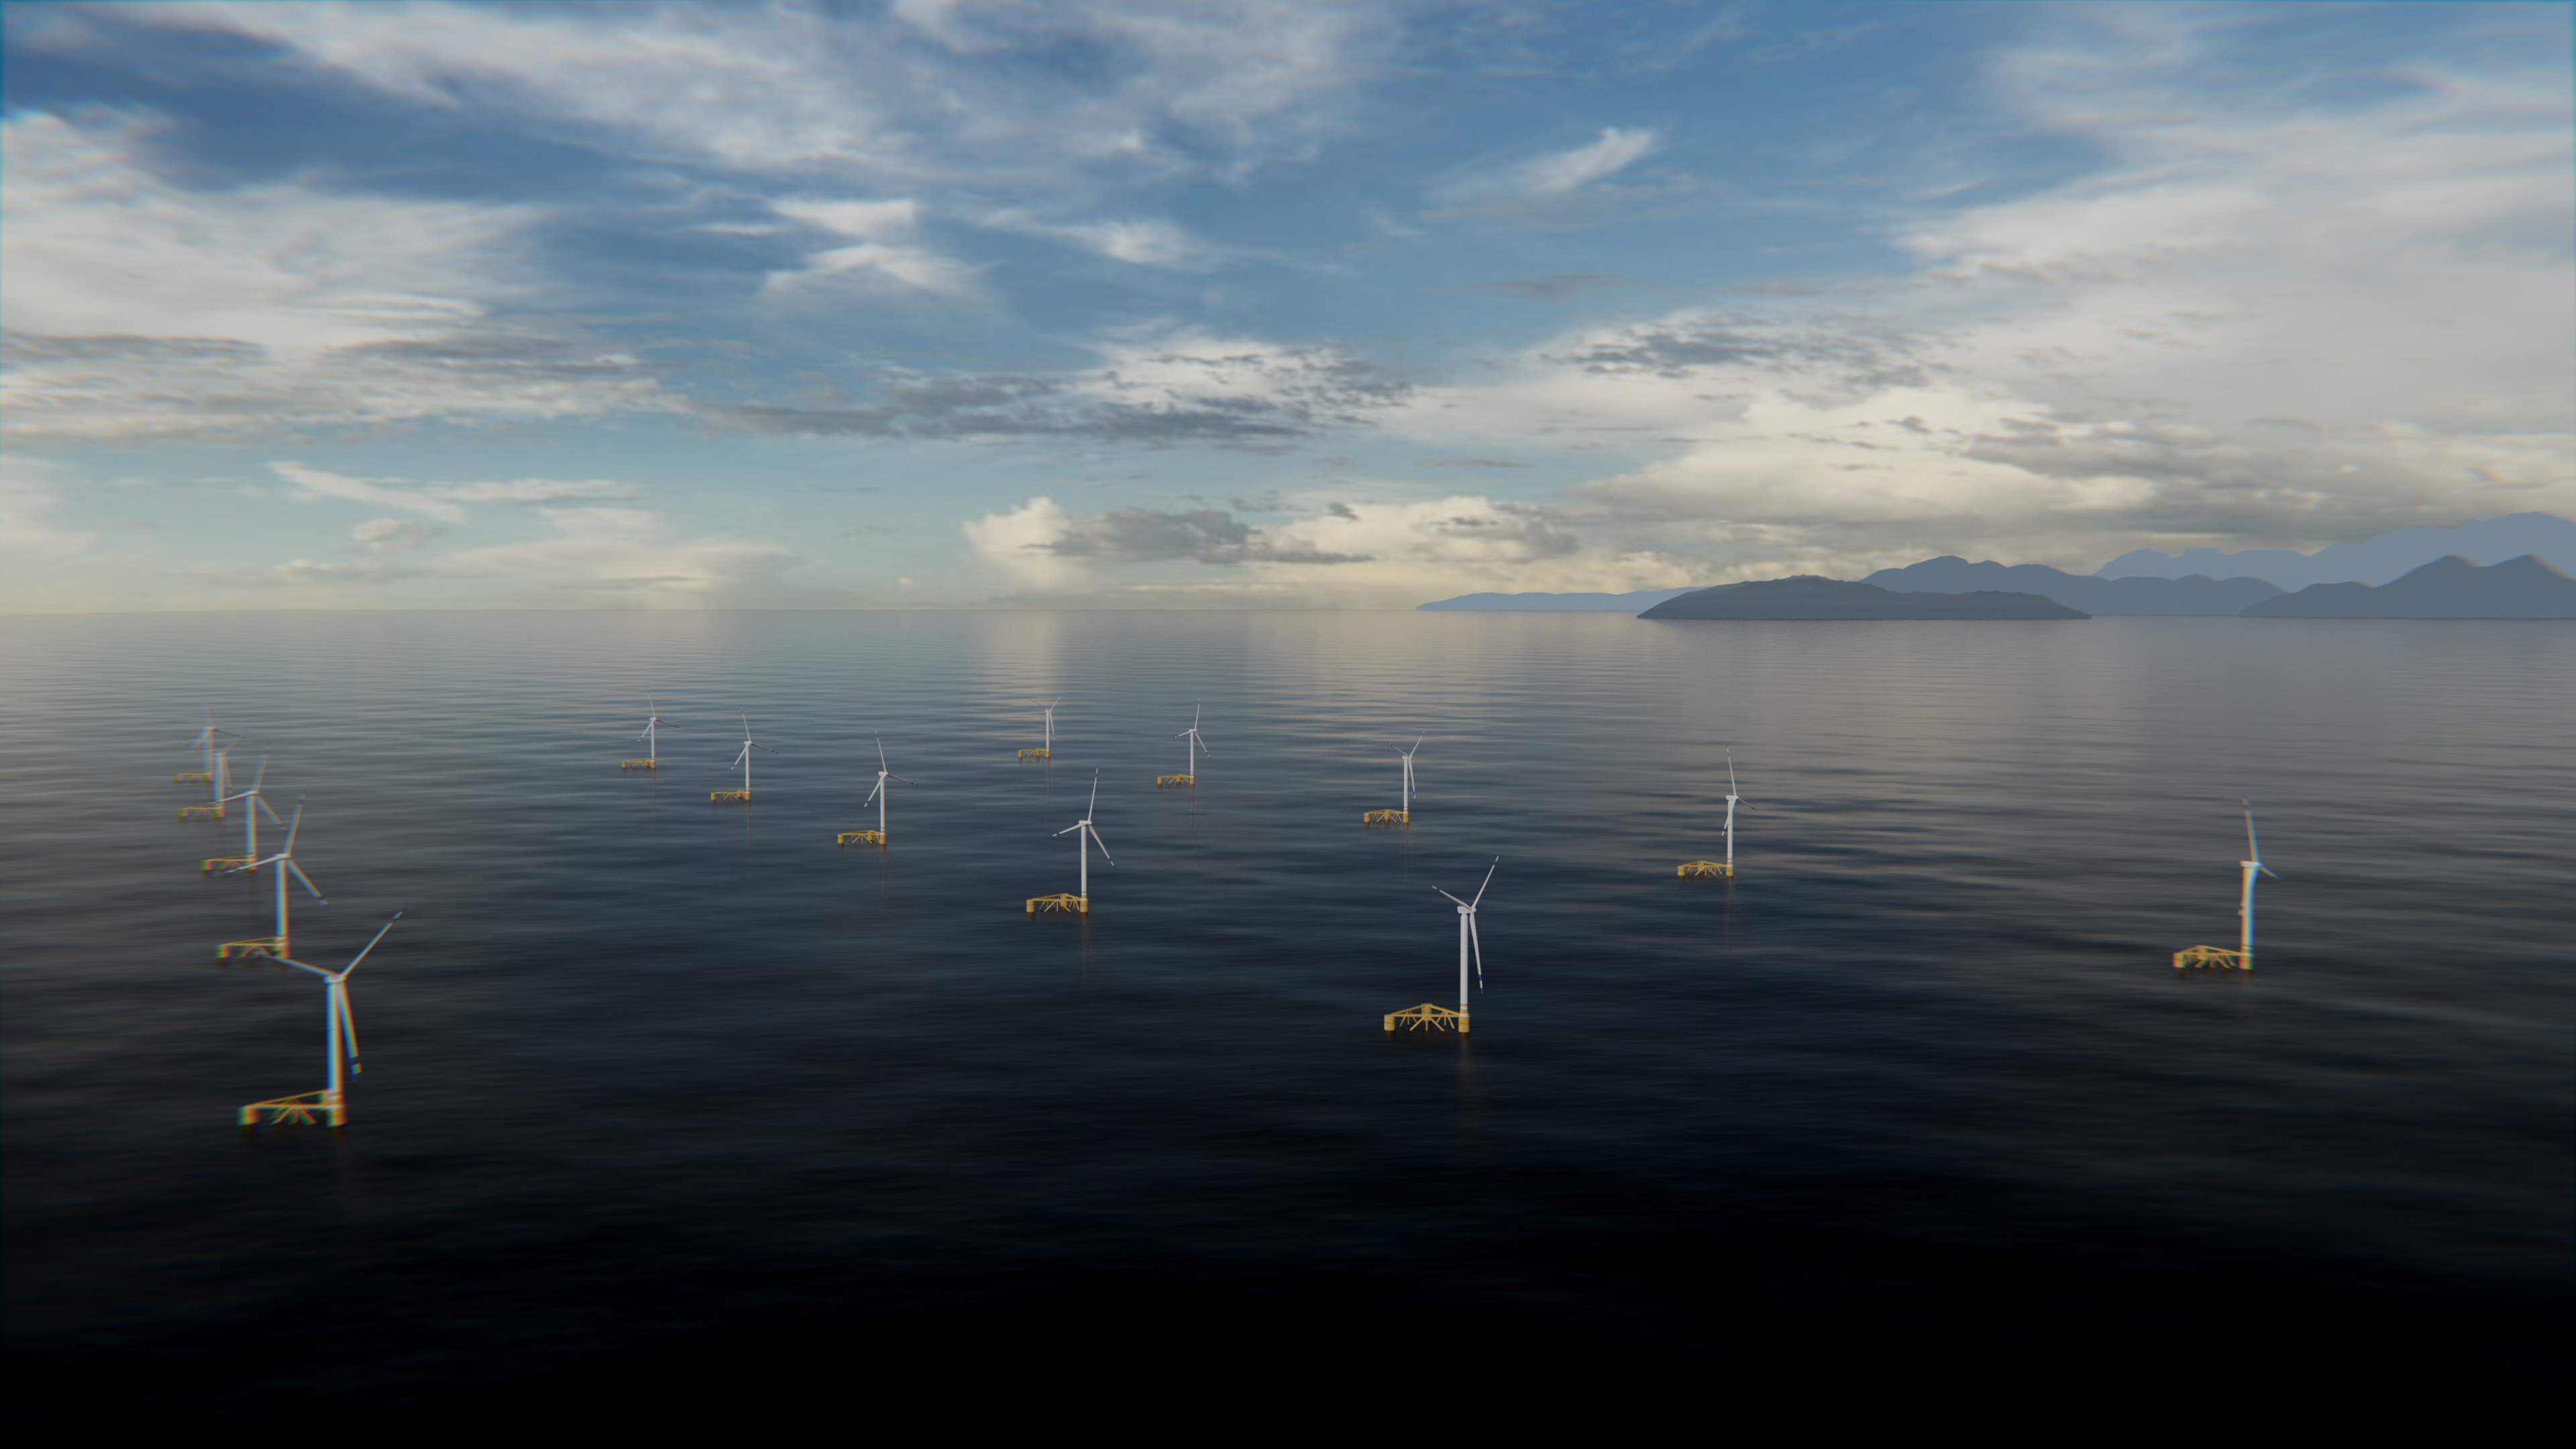 Odfjell Oceanwind on track towards full DNV class approval of its Deepsea Semi™ floating wind foundation design